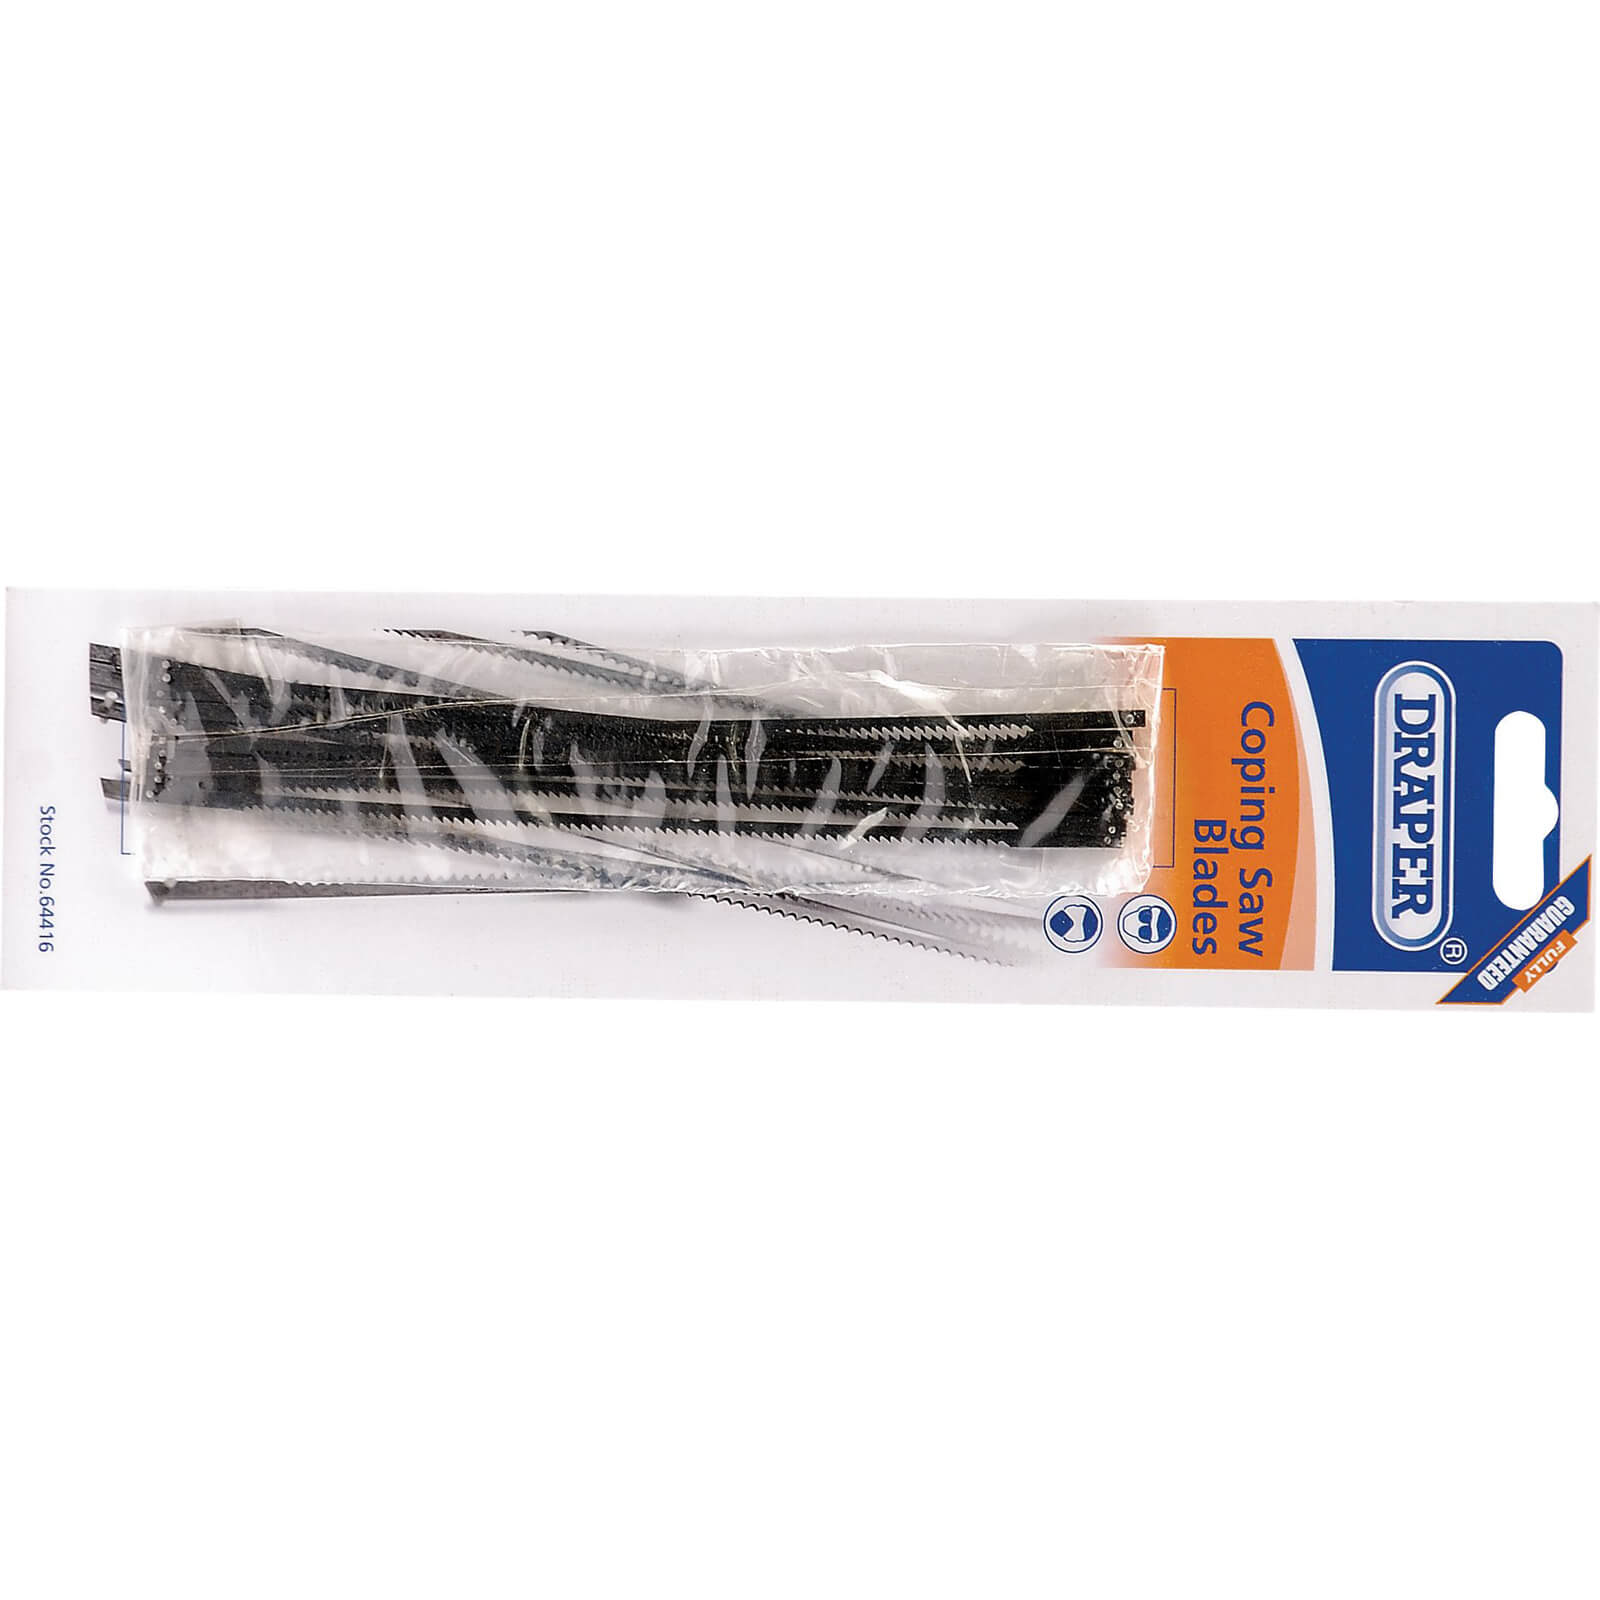 Image of Draper Coping Saw Blades Pack of 10